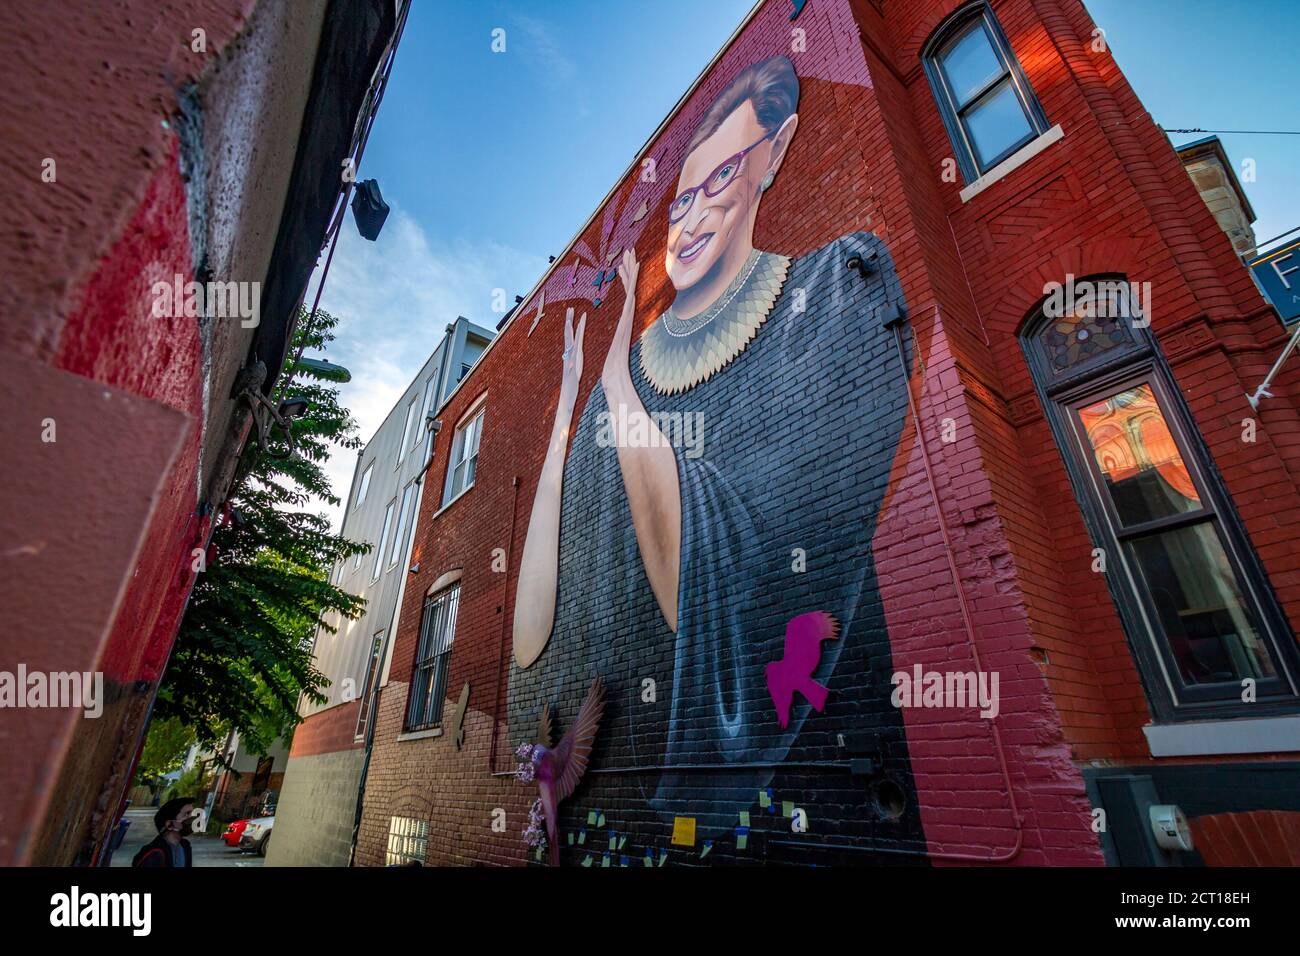 Washingtonians pay their respects to Justice Ruth Bader Ginsburg with messages and flowers at a mural in NW Washington, Saturday, 19 September 2020. Stock Photo